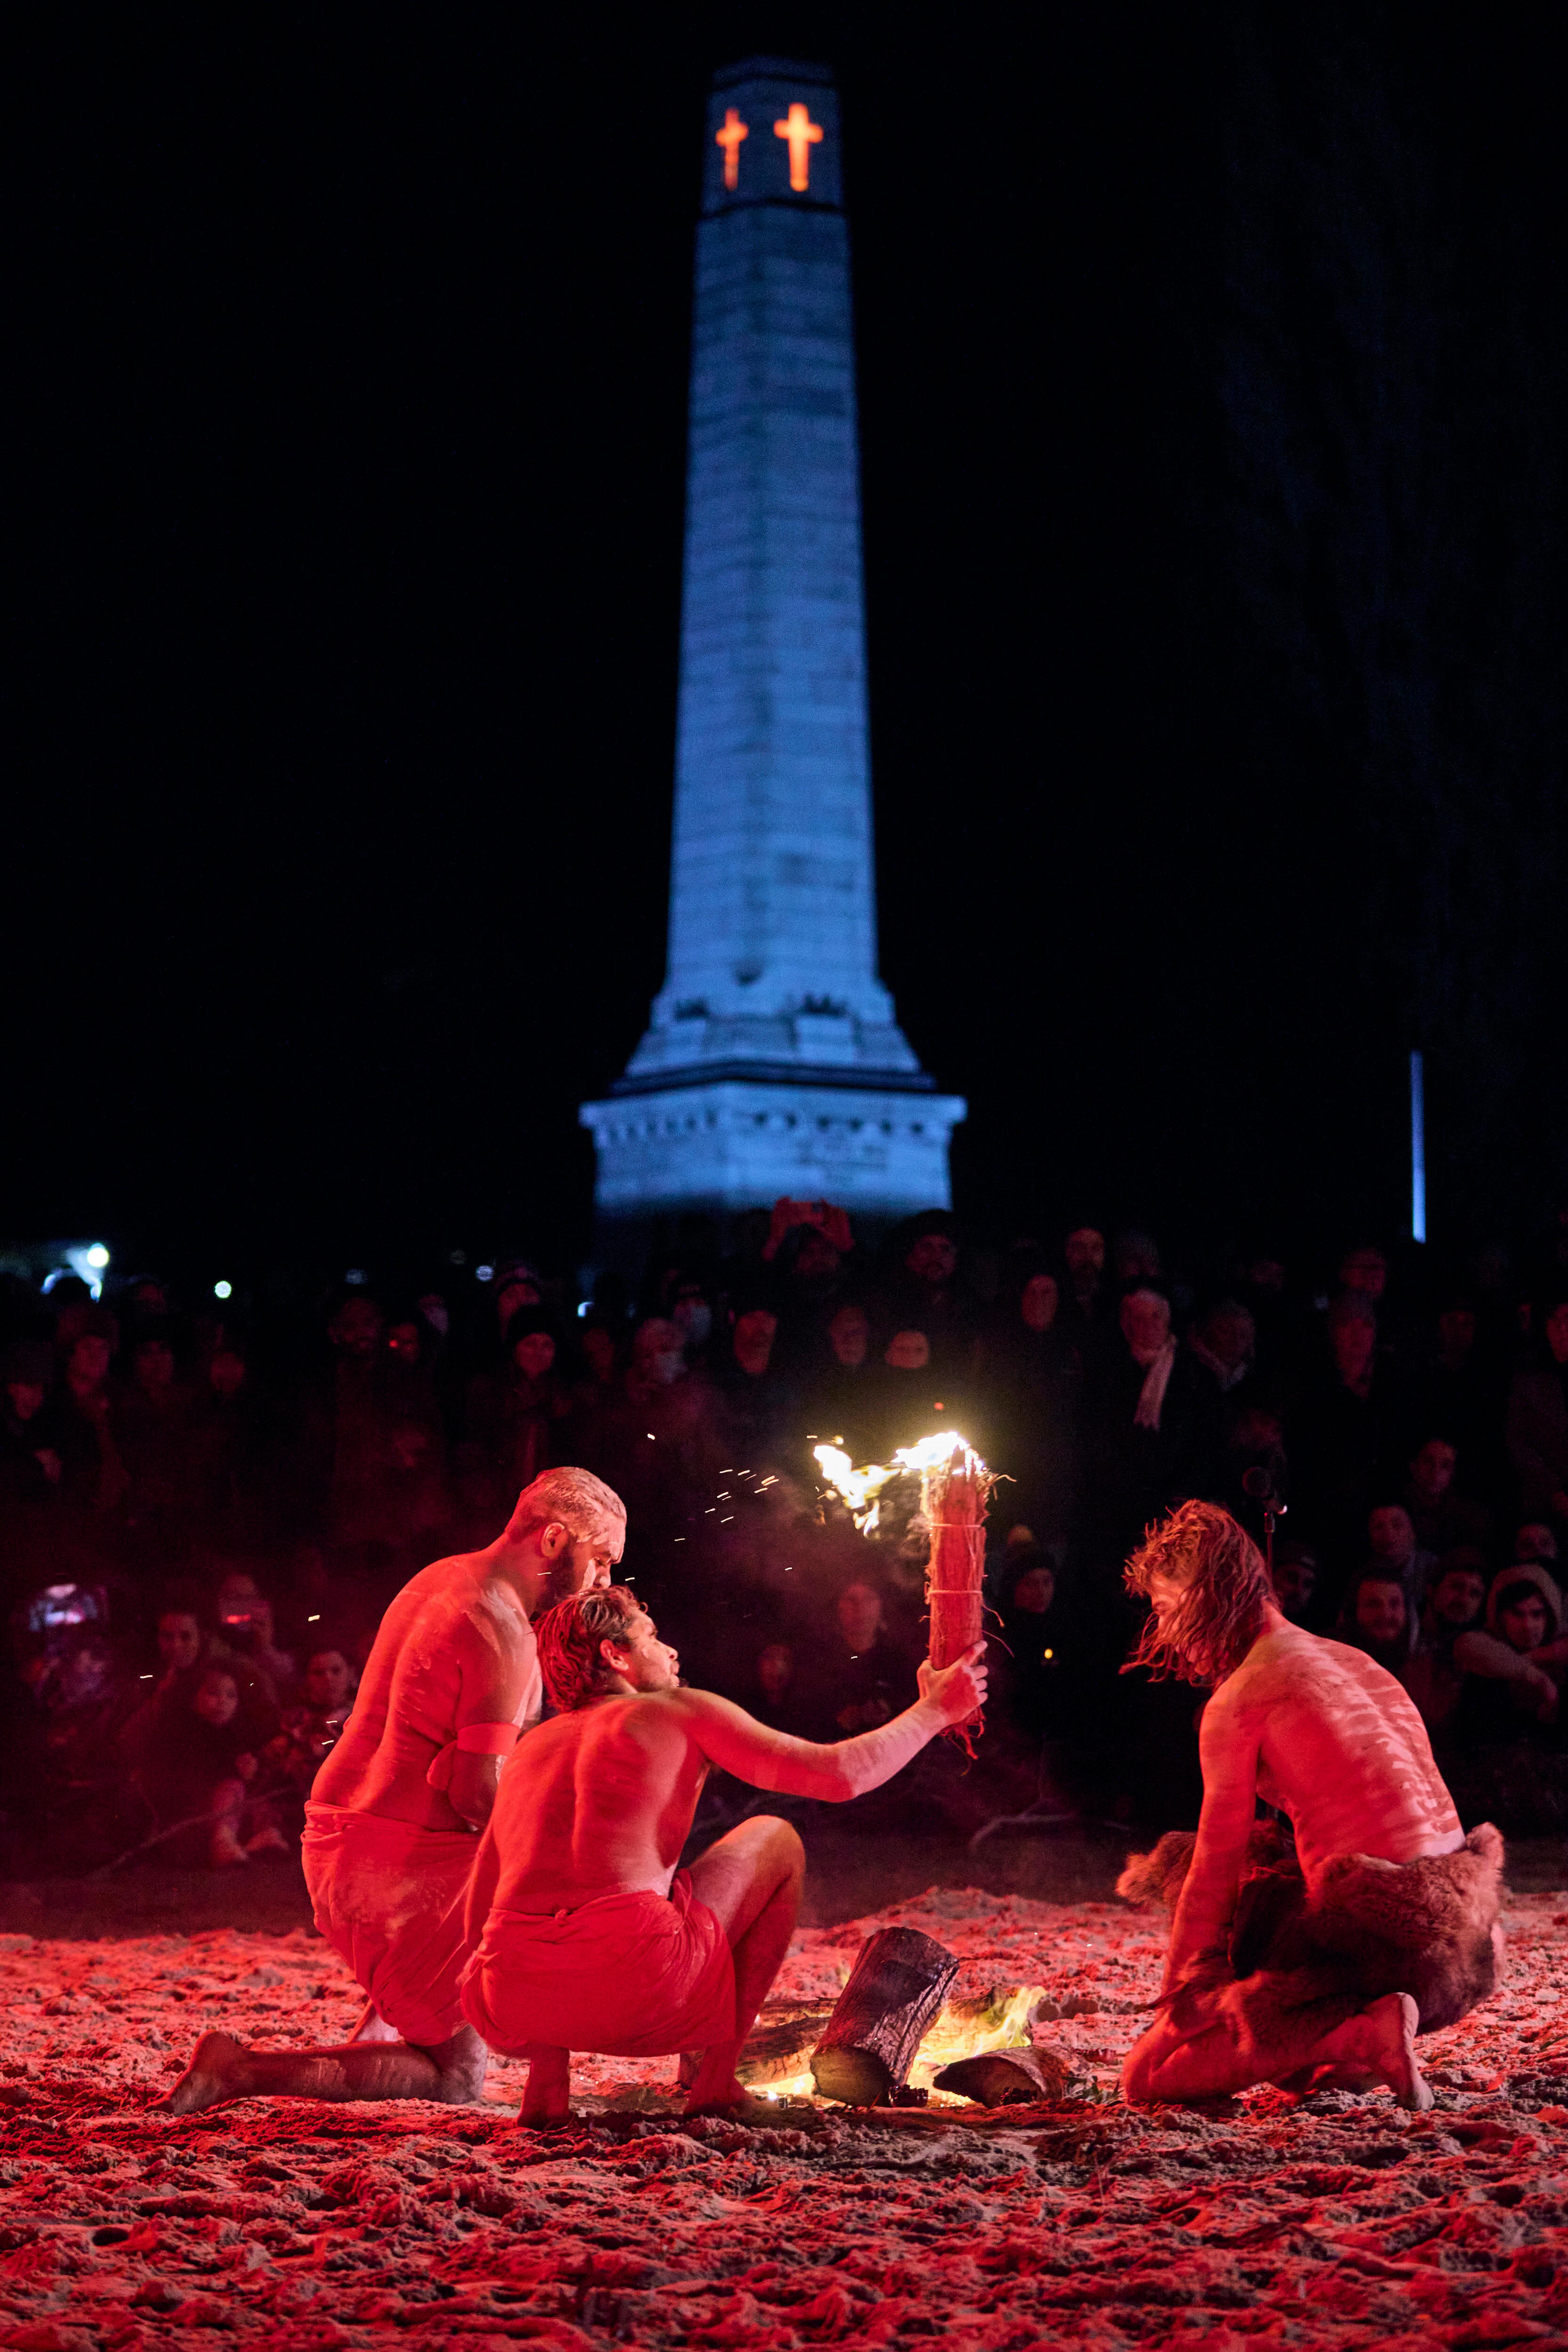 Three First Nations performers crouch in soil around a fire before an audience. One holds a flaming torch.